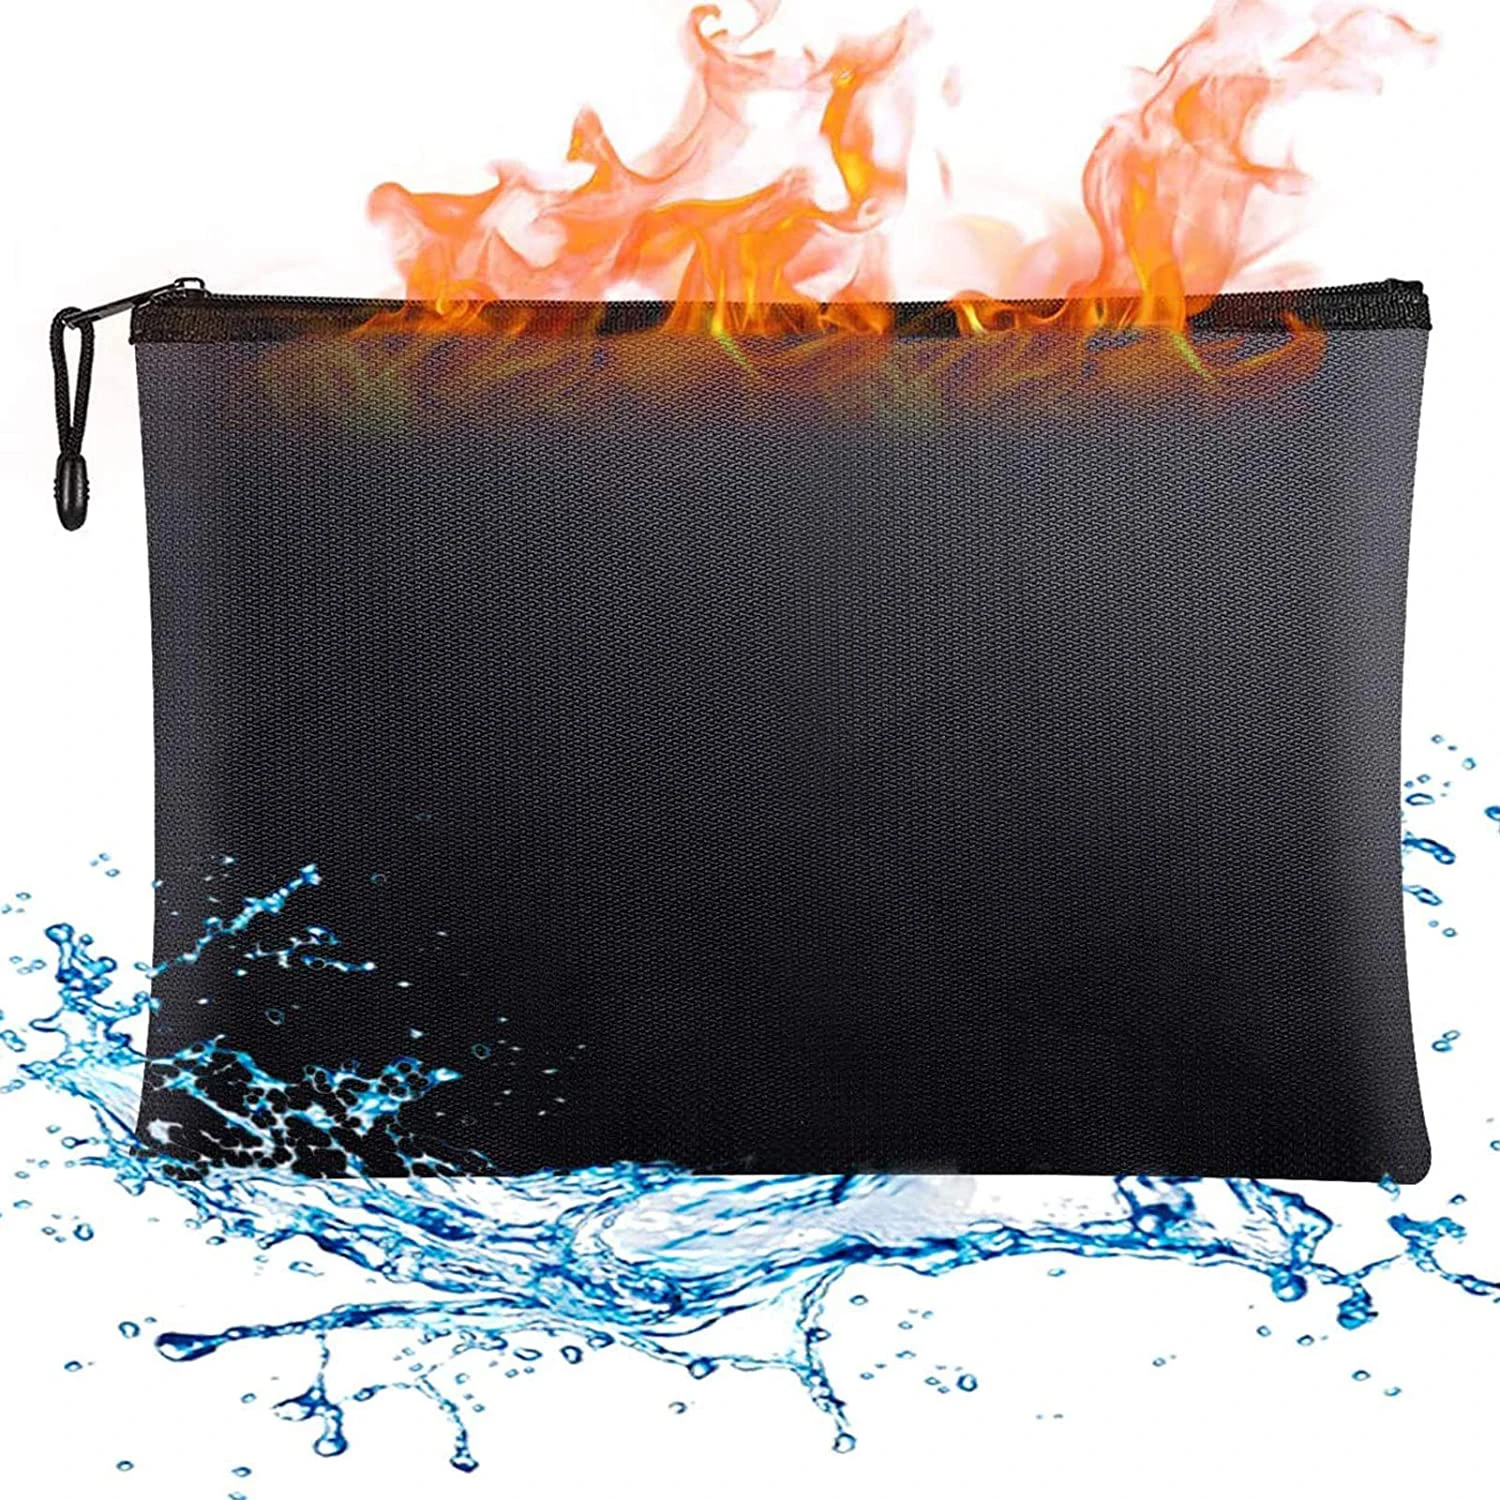 Sliver 10.6INCH Fireproof Document Bags Fire and Water Resistant Cash Bag,Fireproof Safe Storage Pouch for Money,Cash and Document 